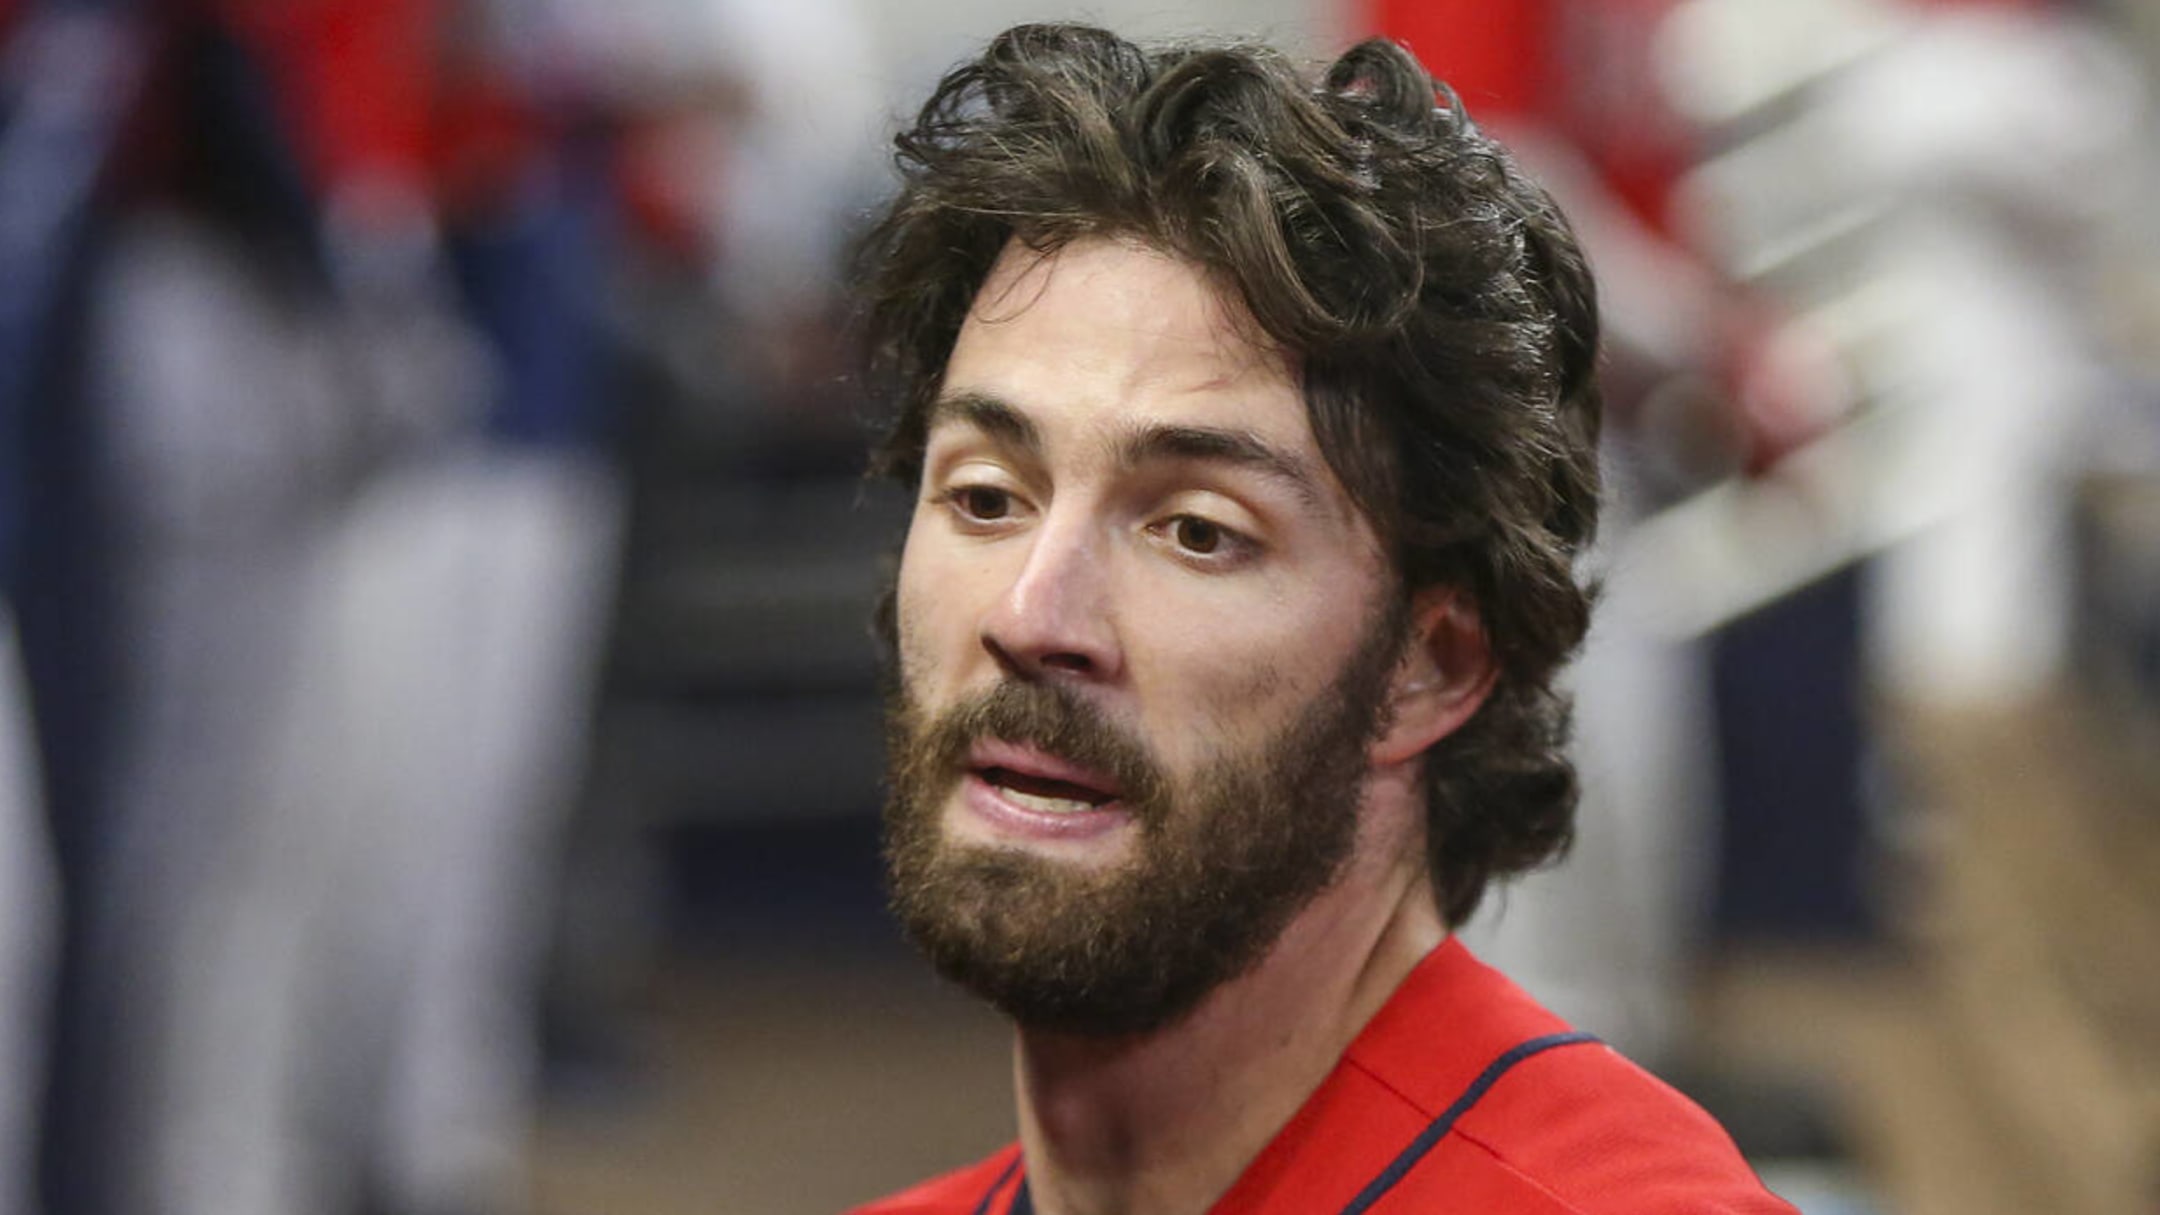 Cubs' Dansby Swanson becomes face of Chicago franchise with $177M deal